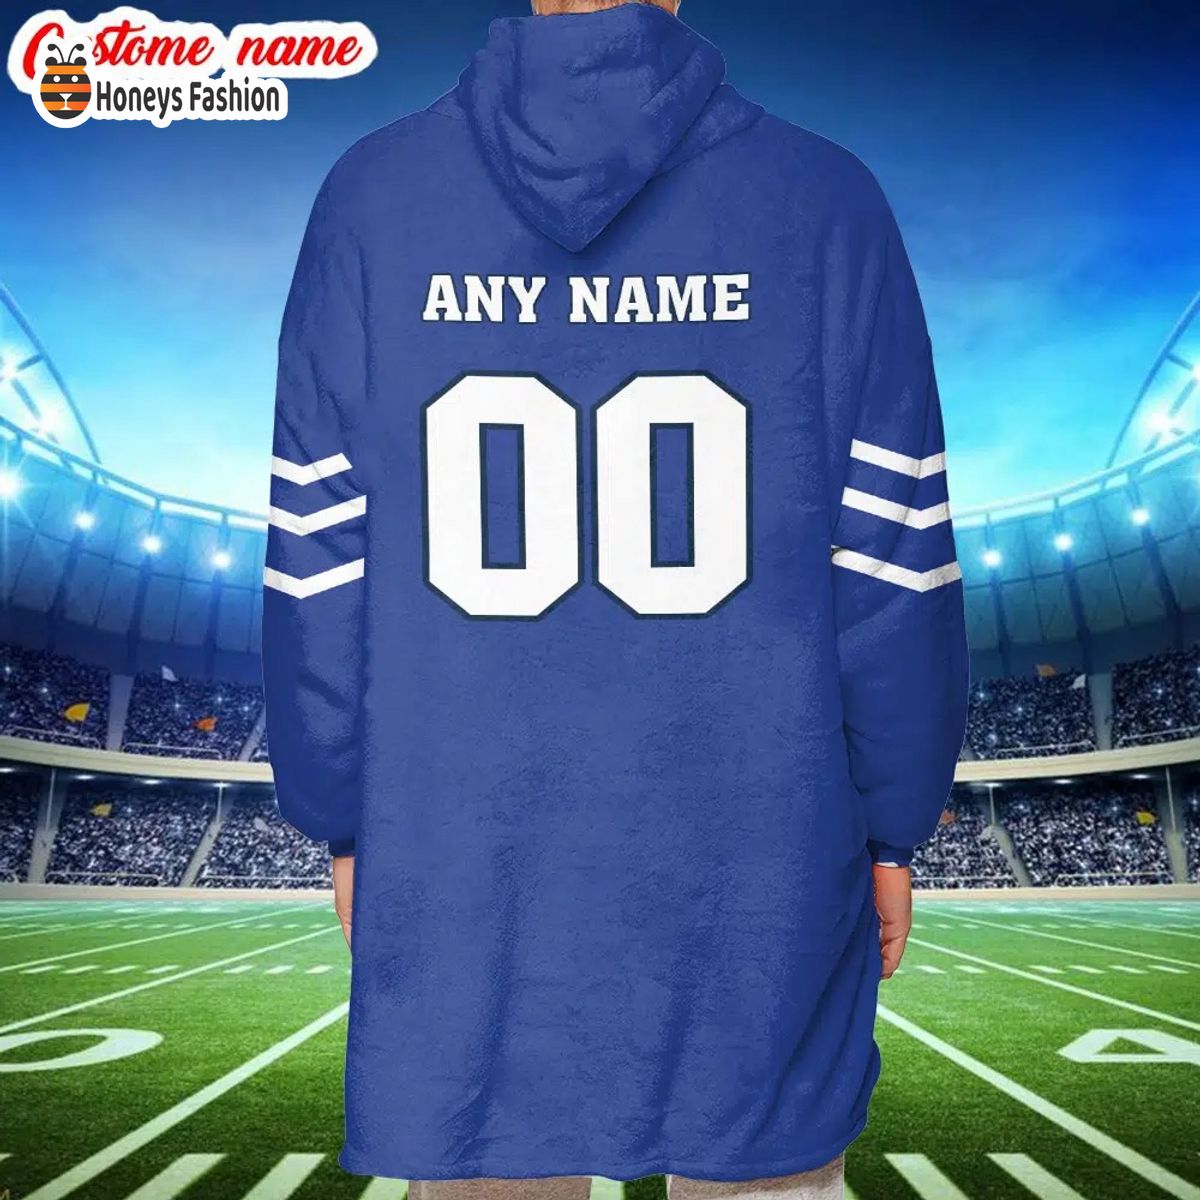 Los Angeles Rams NFL Adidas all day i dream about Rams blanket hoodie